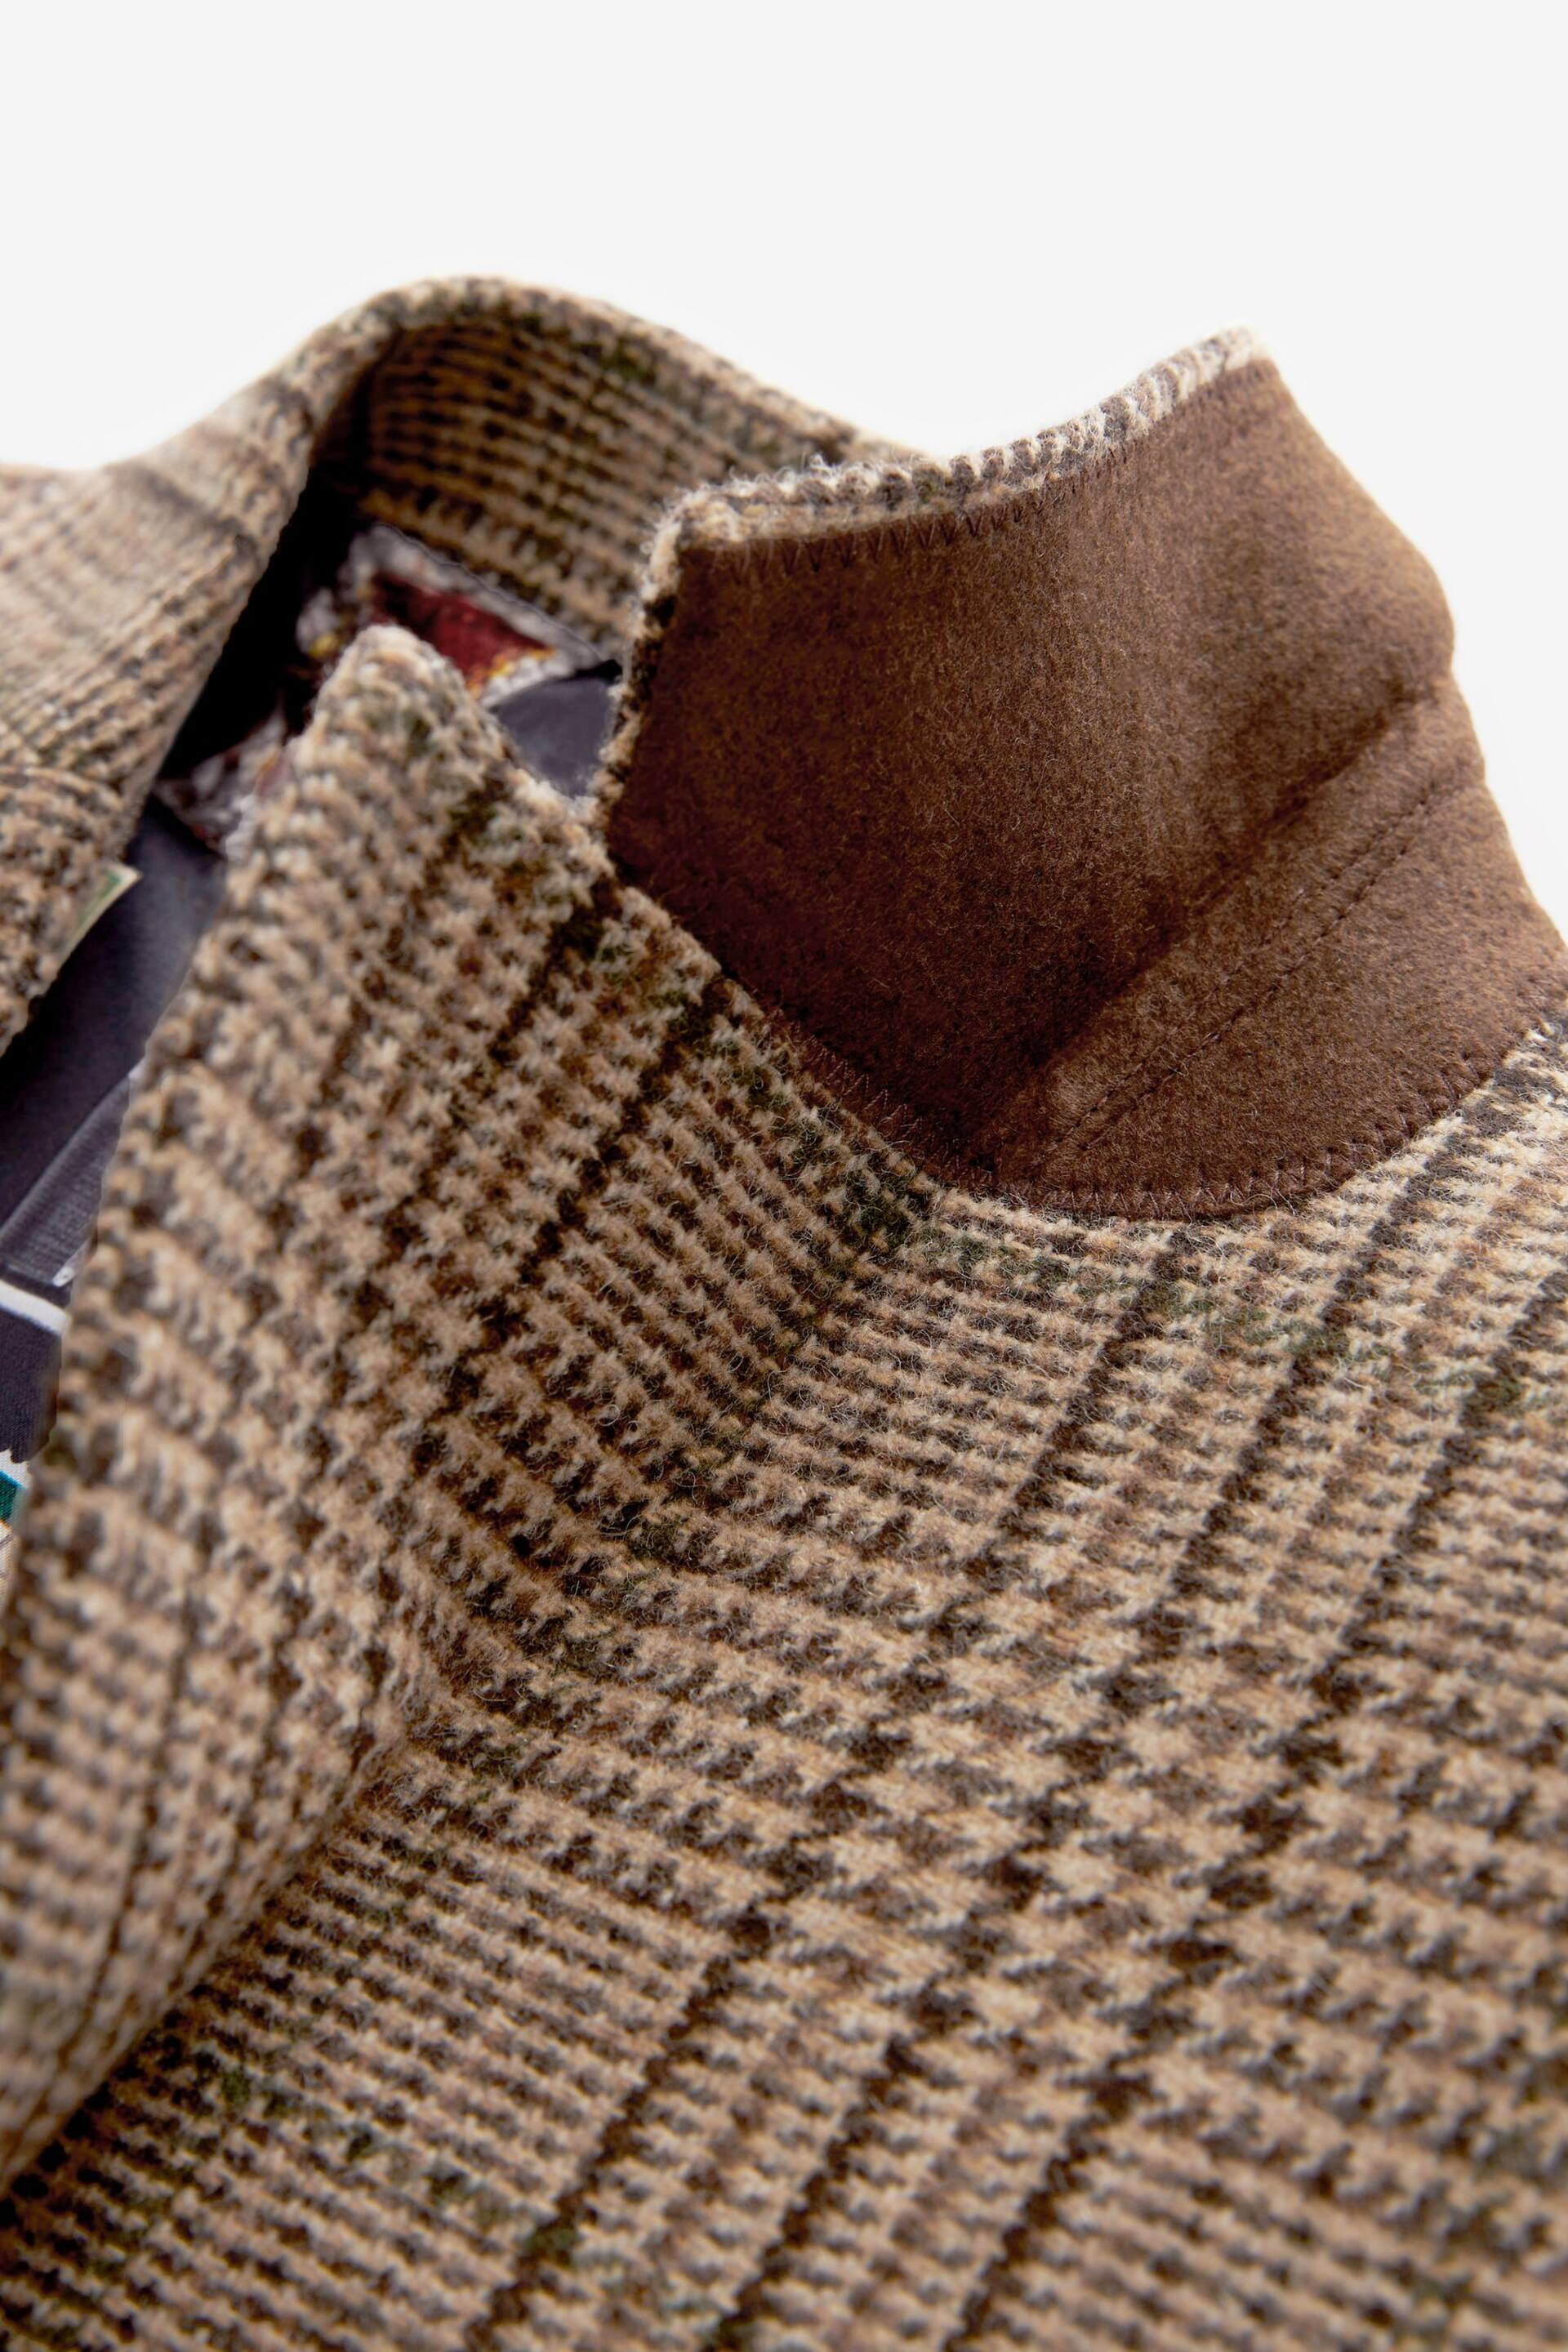 Brown Slim Wool Content Check Suit Jacket - Image 8 of 12